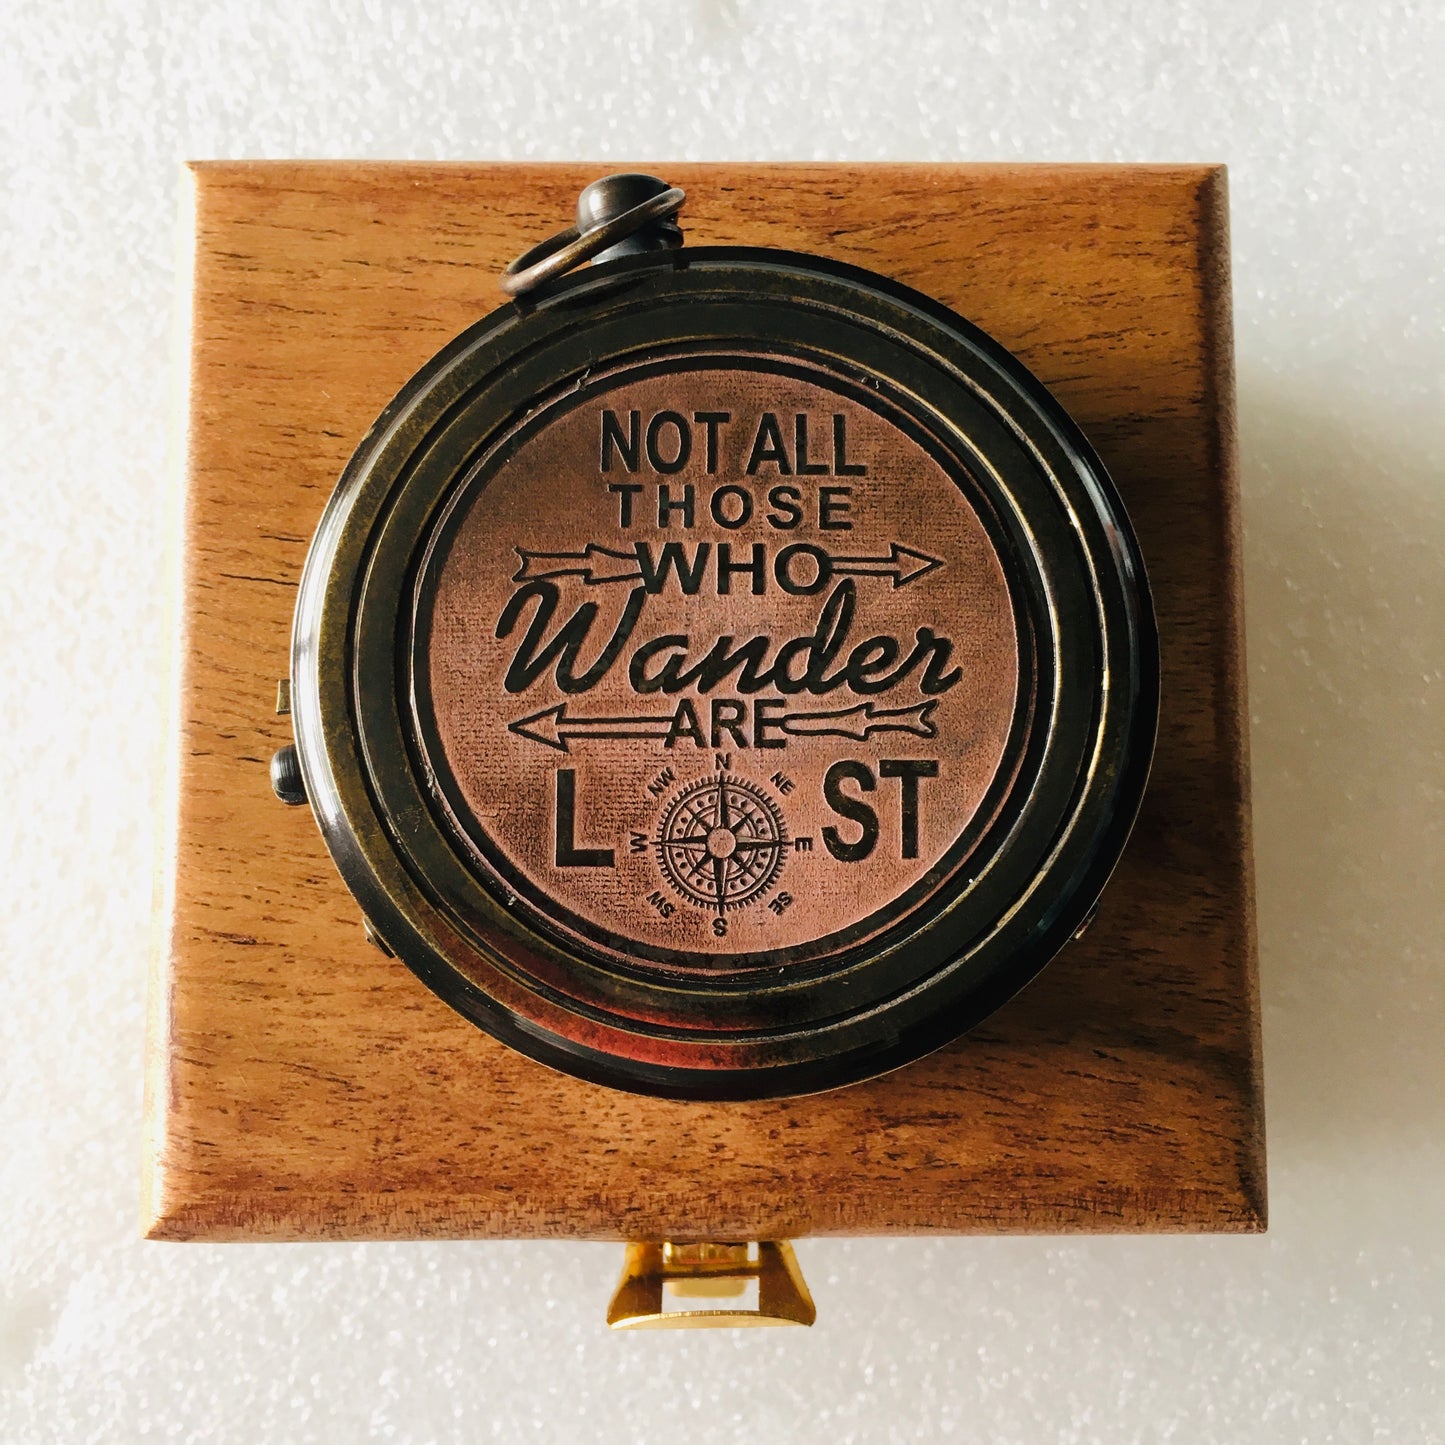 Compass "Not All Those Who Wander are LOST" with Box